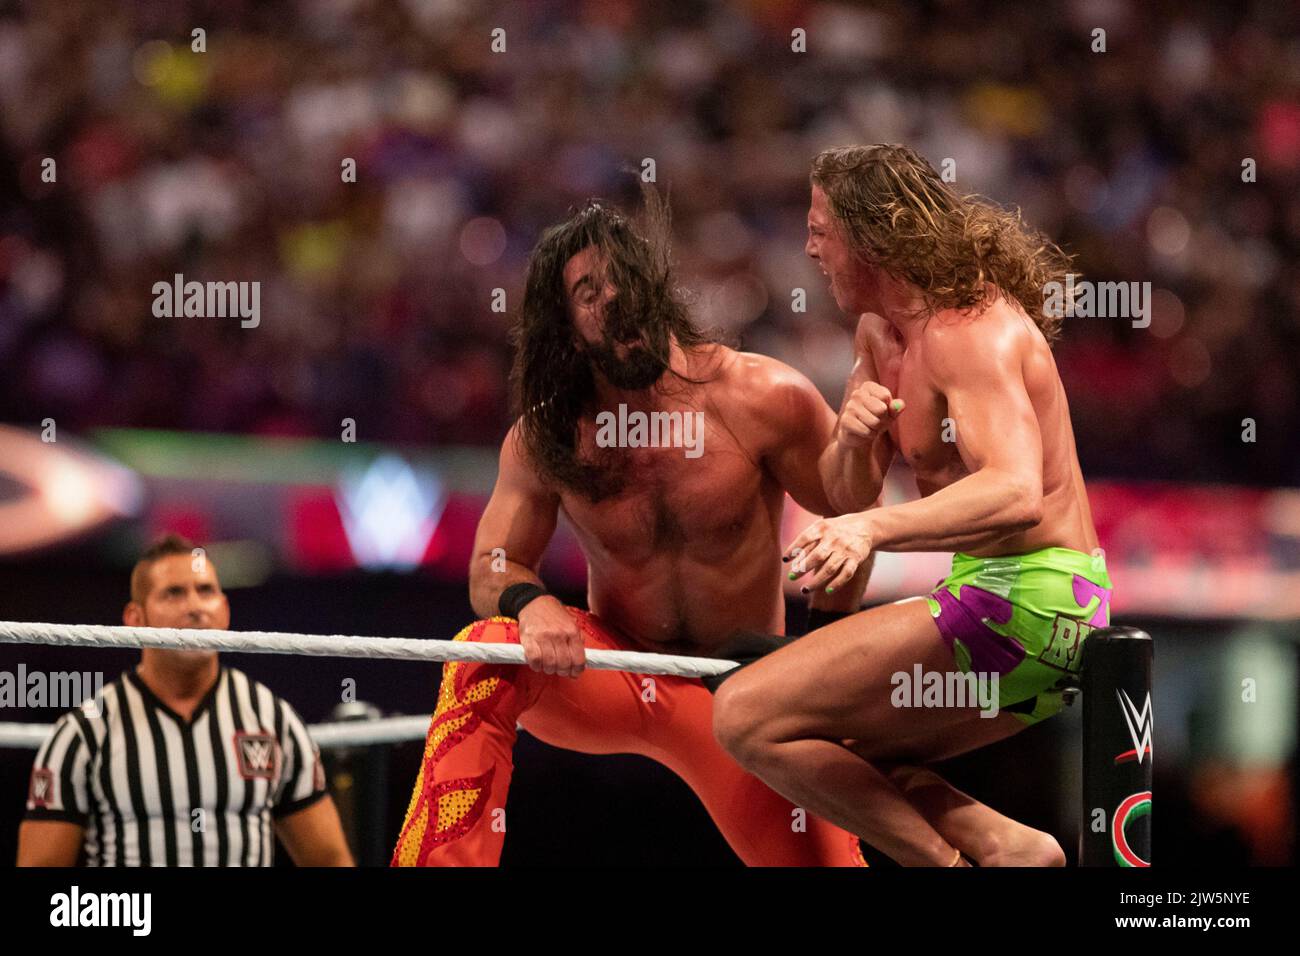 Cardiff, Wales, UK. 3rd Sep, 2022. Matt Riddle vs. Seth 'Freakin' Rollins during the WWE ‘Clash At The Castle' wrestling event at the Principality Stadium in Cardiff. Credit: Mark Hawkins/Alamy Live News Stock Photo